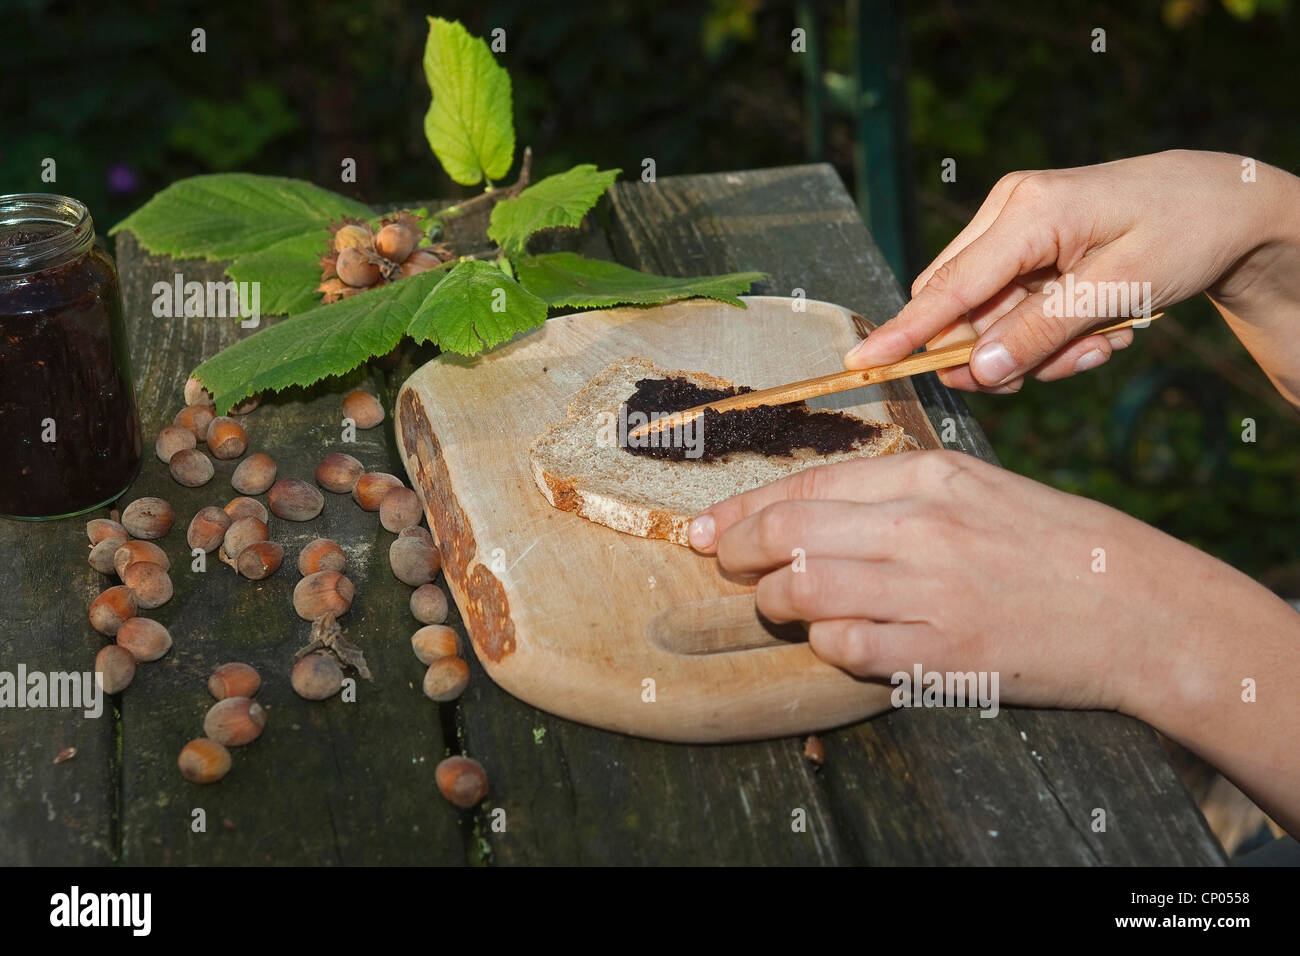 Common hazel (Corylus avellana), child sitting at the garden table putting chocolate spread he made of self-collected hazelnuts, cocoa powder, butter and sugar on a slice of bread, Germany Stock Photo